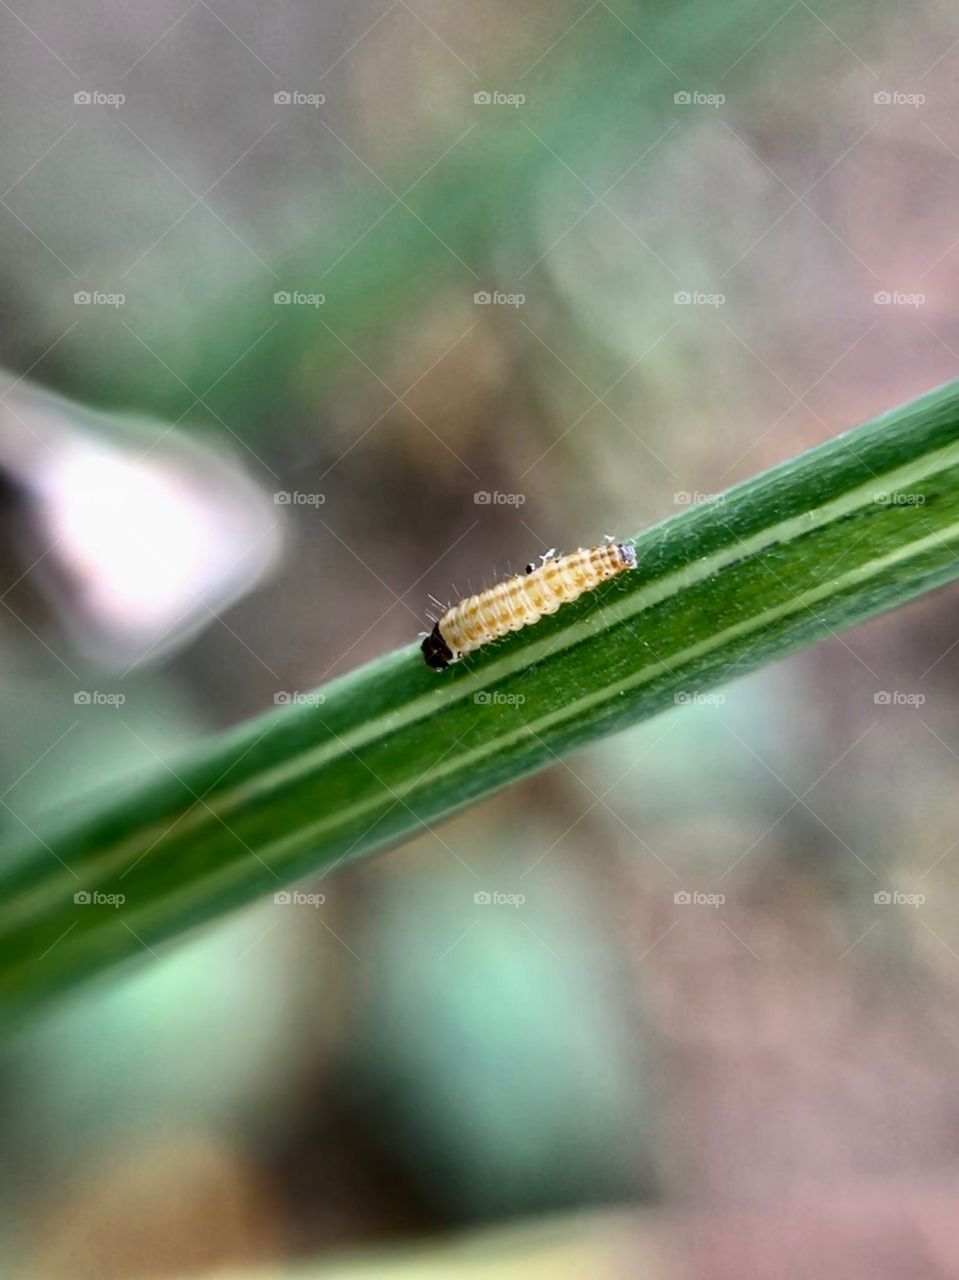 A little caterpillar | Photo with iPhone 7 + Macro lens.